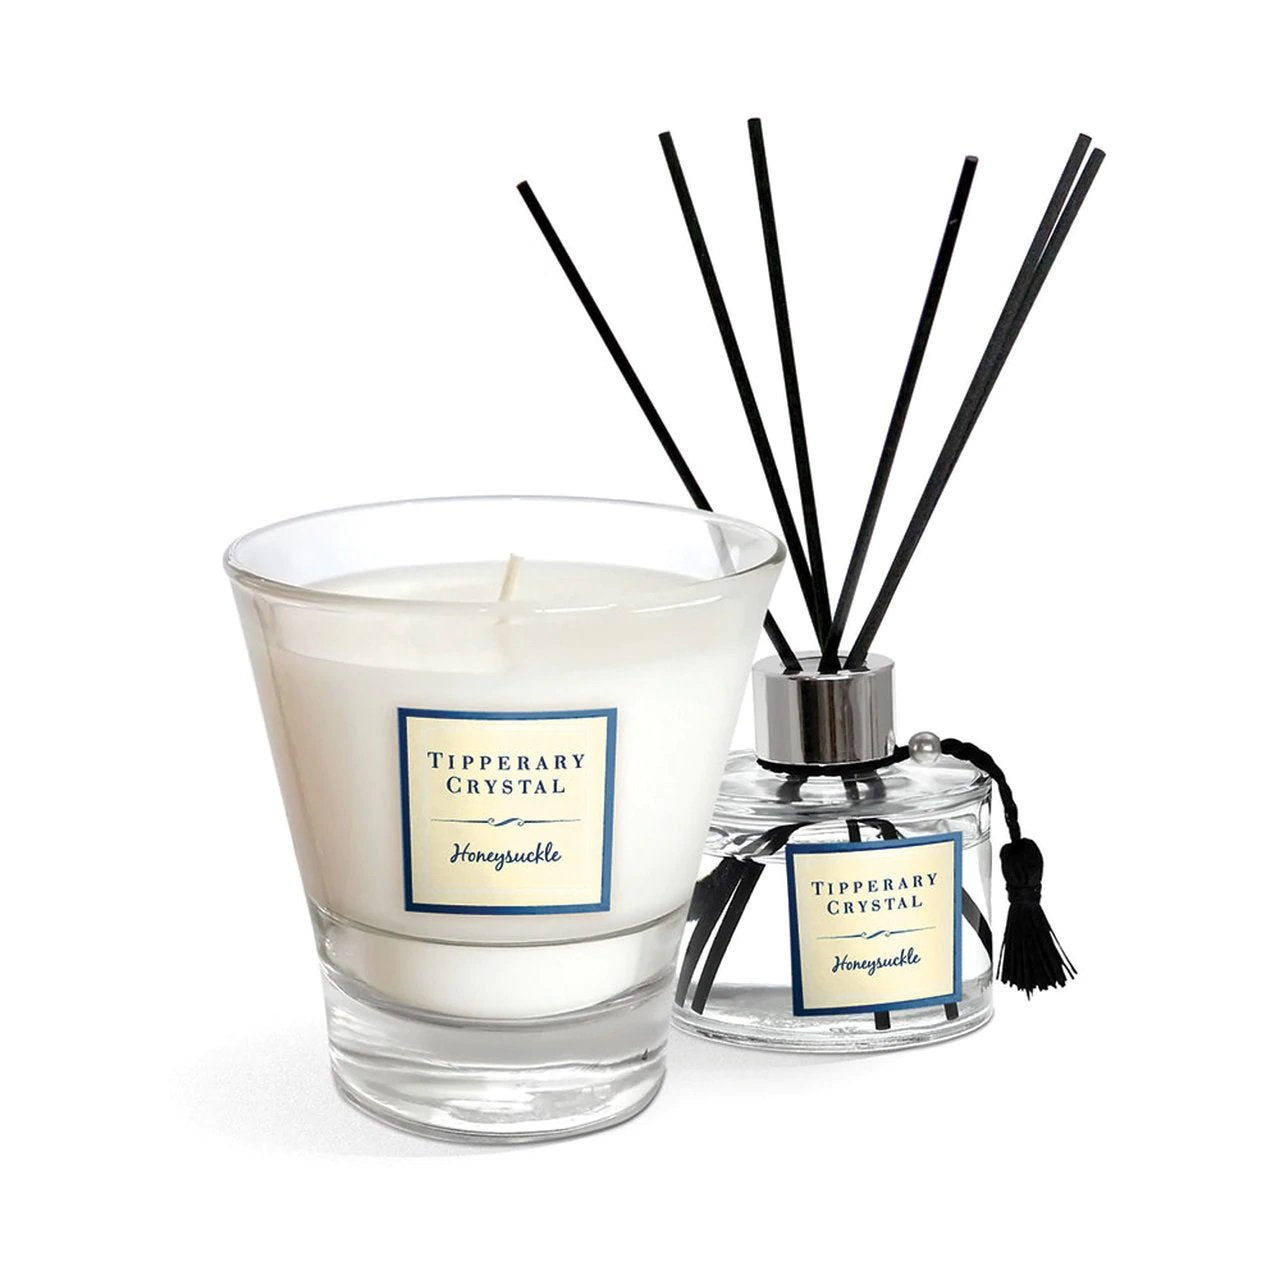 Tipperary Crystal Honeysuckle Candle & Diffuser Gift Set